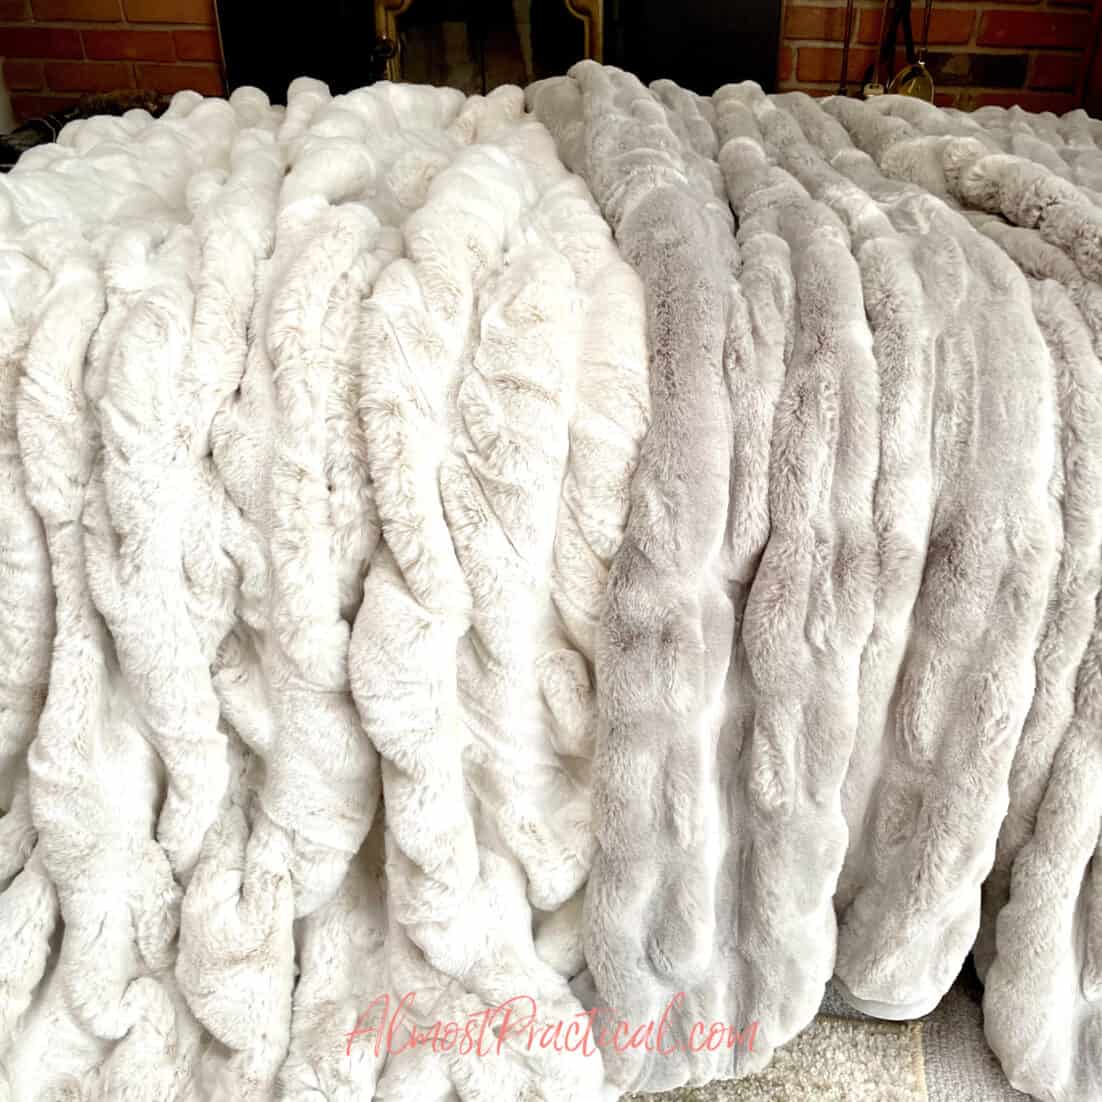 2 pottery barn faux fur ruched throws side by side